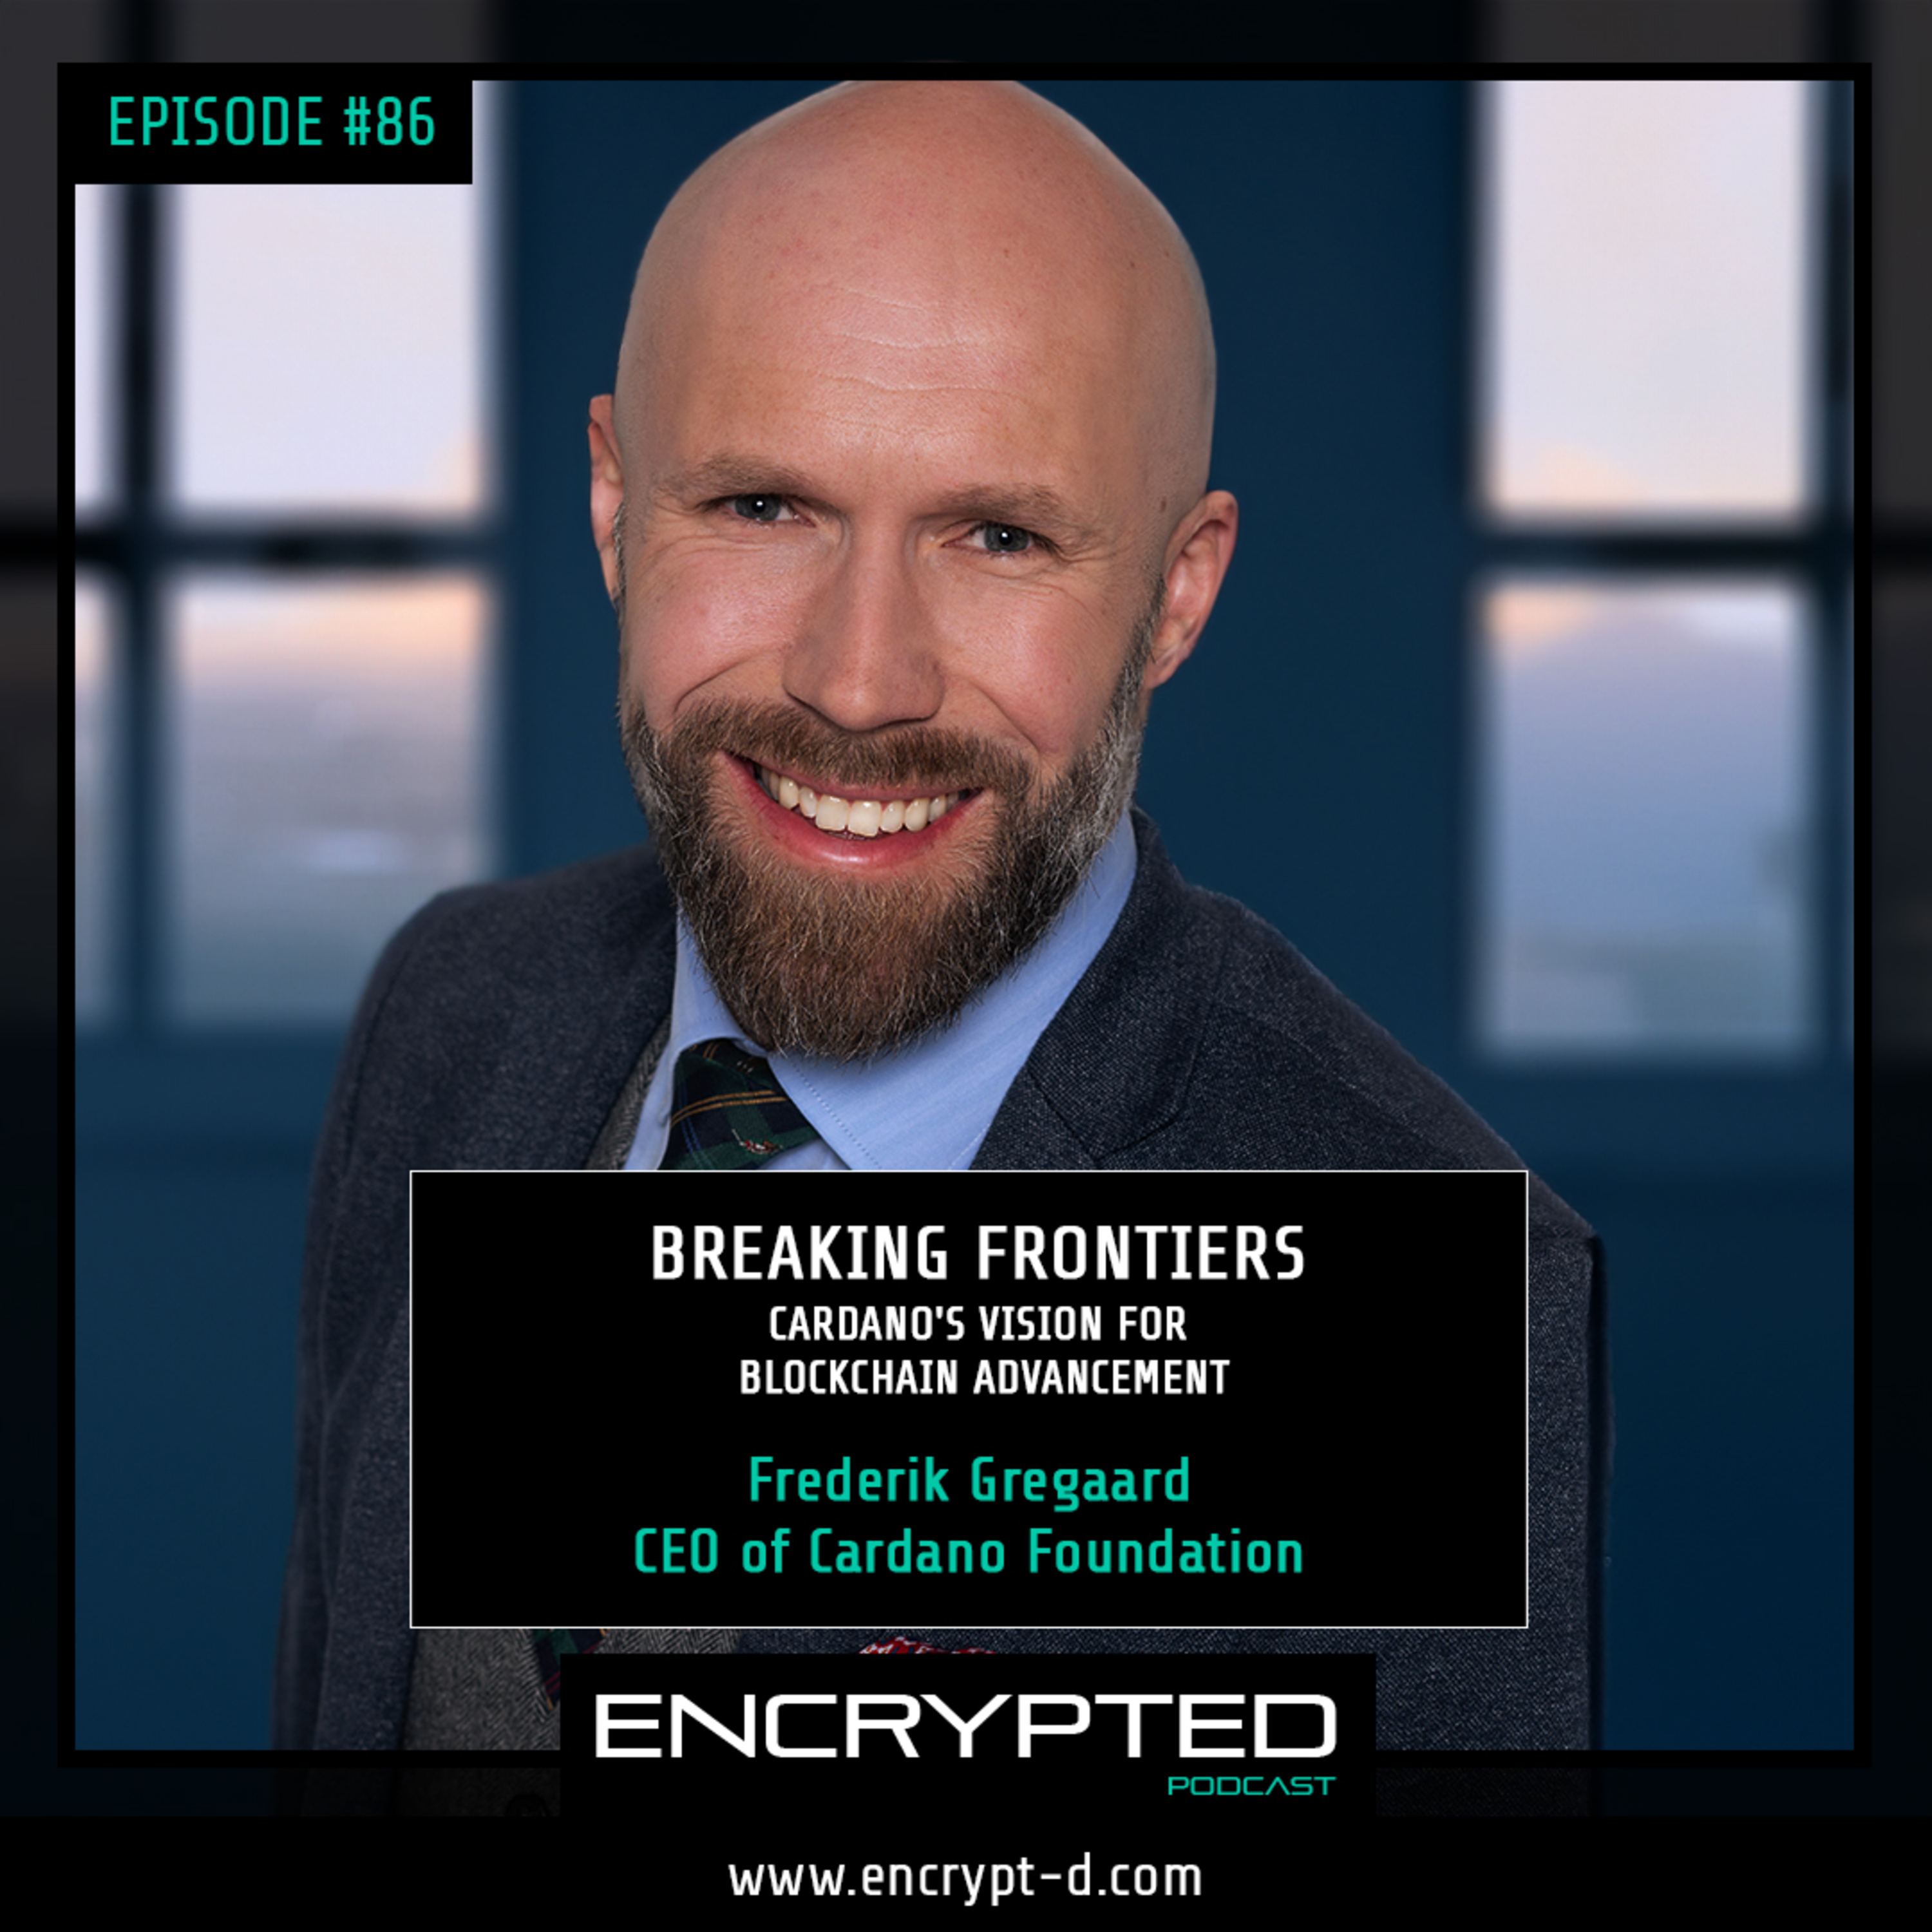 #Ep.86: ”Breaking Frontiers: #Cardano’s Vision for Blockchain Advancement”.